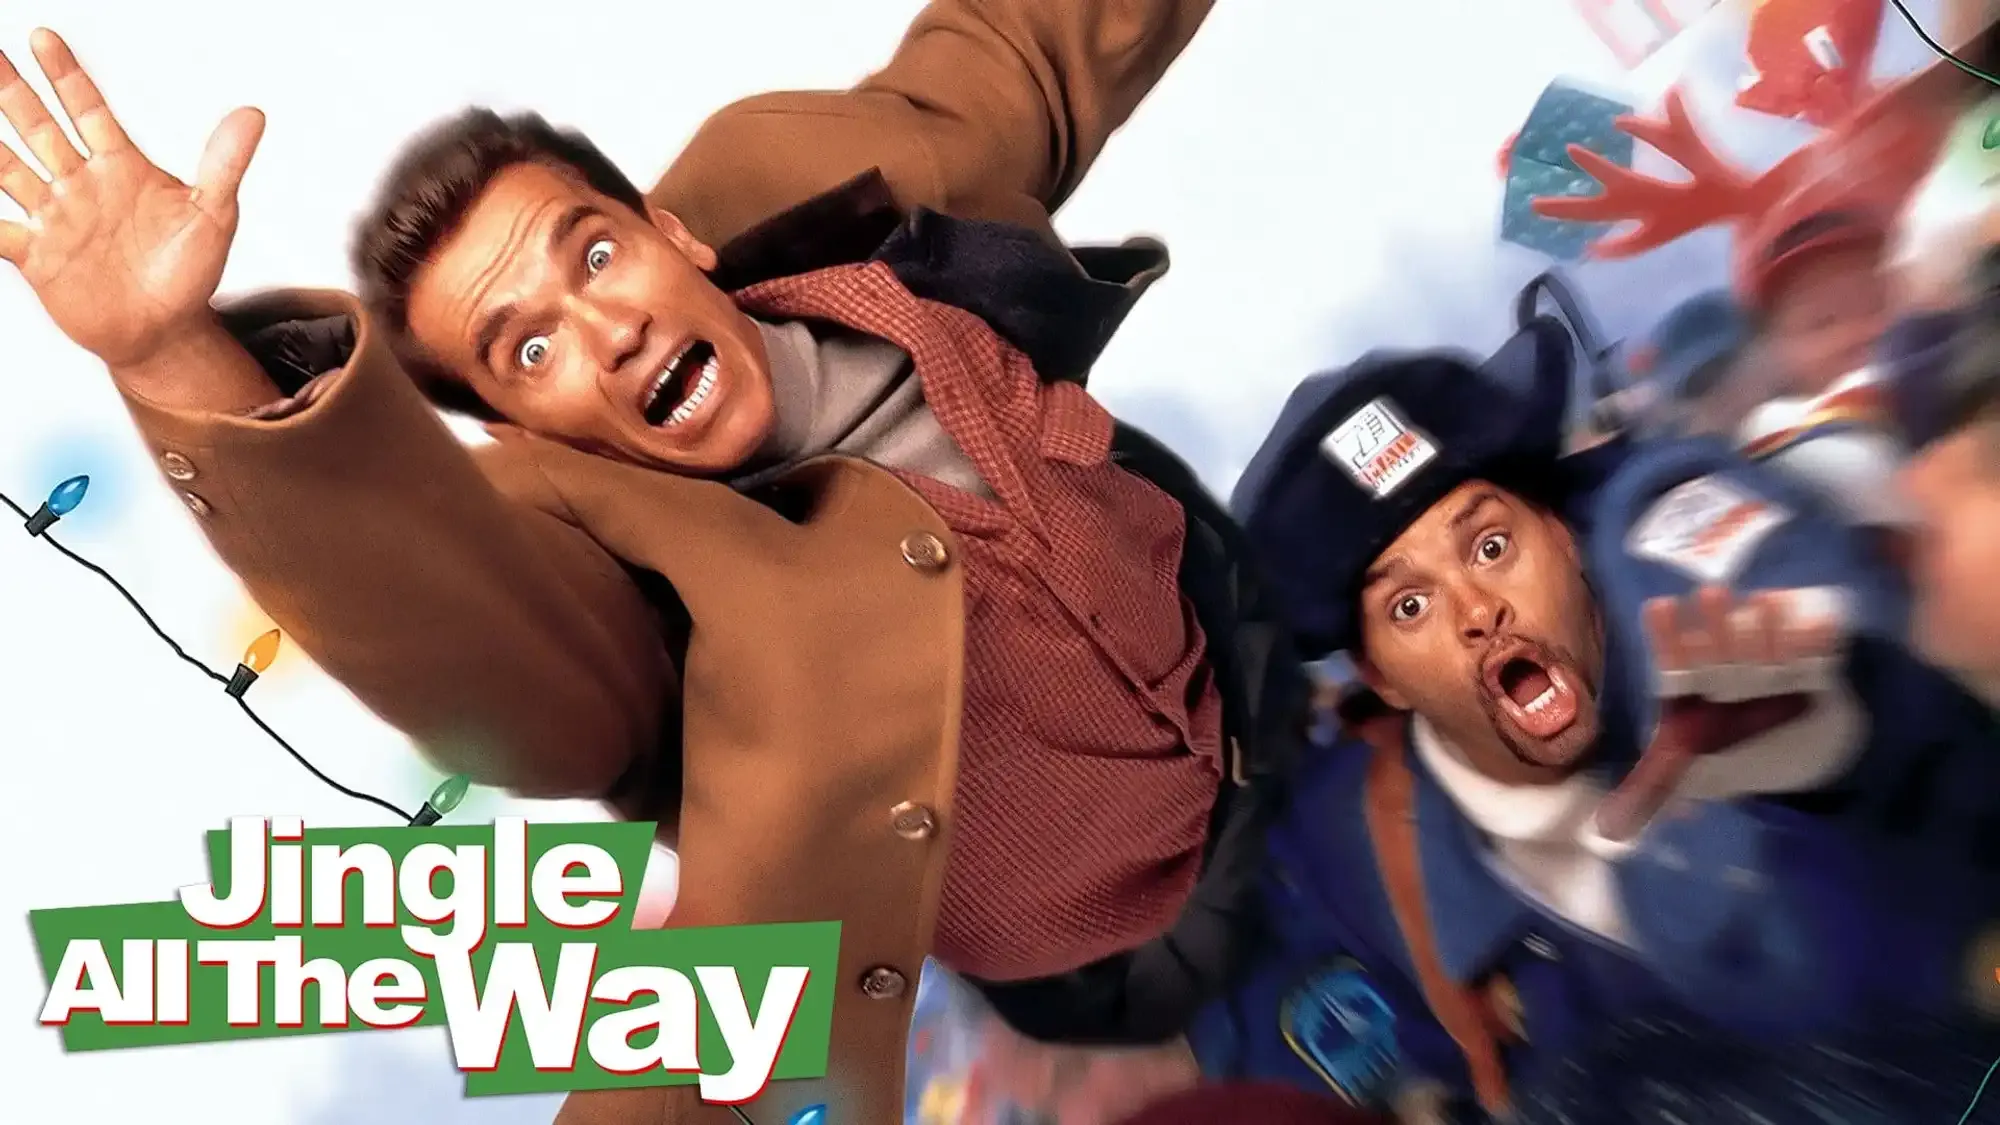 Jingle All the Way movie review